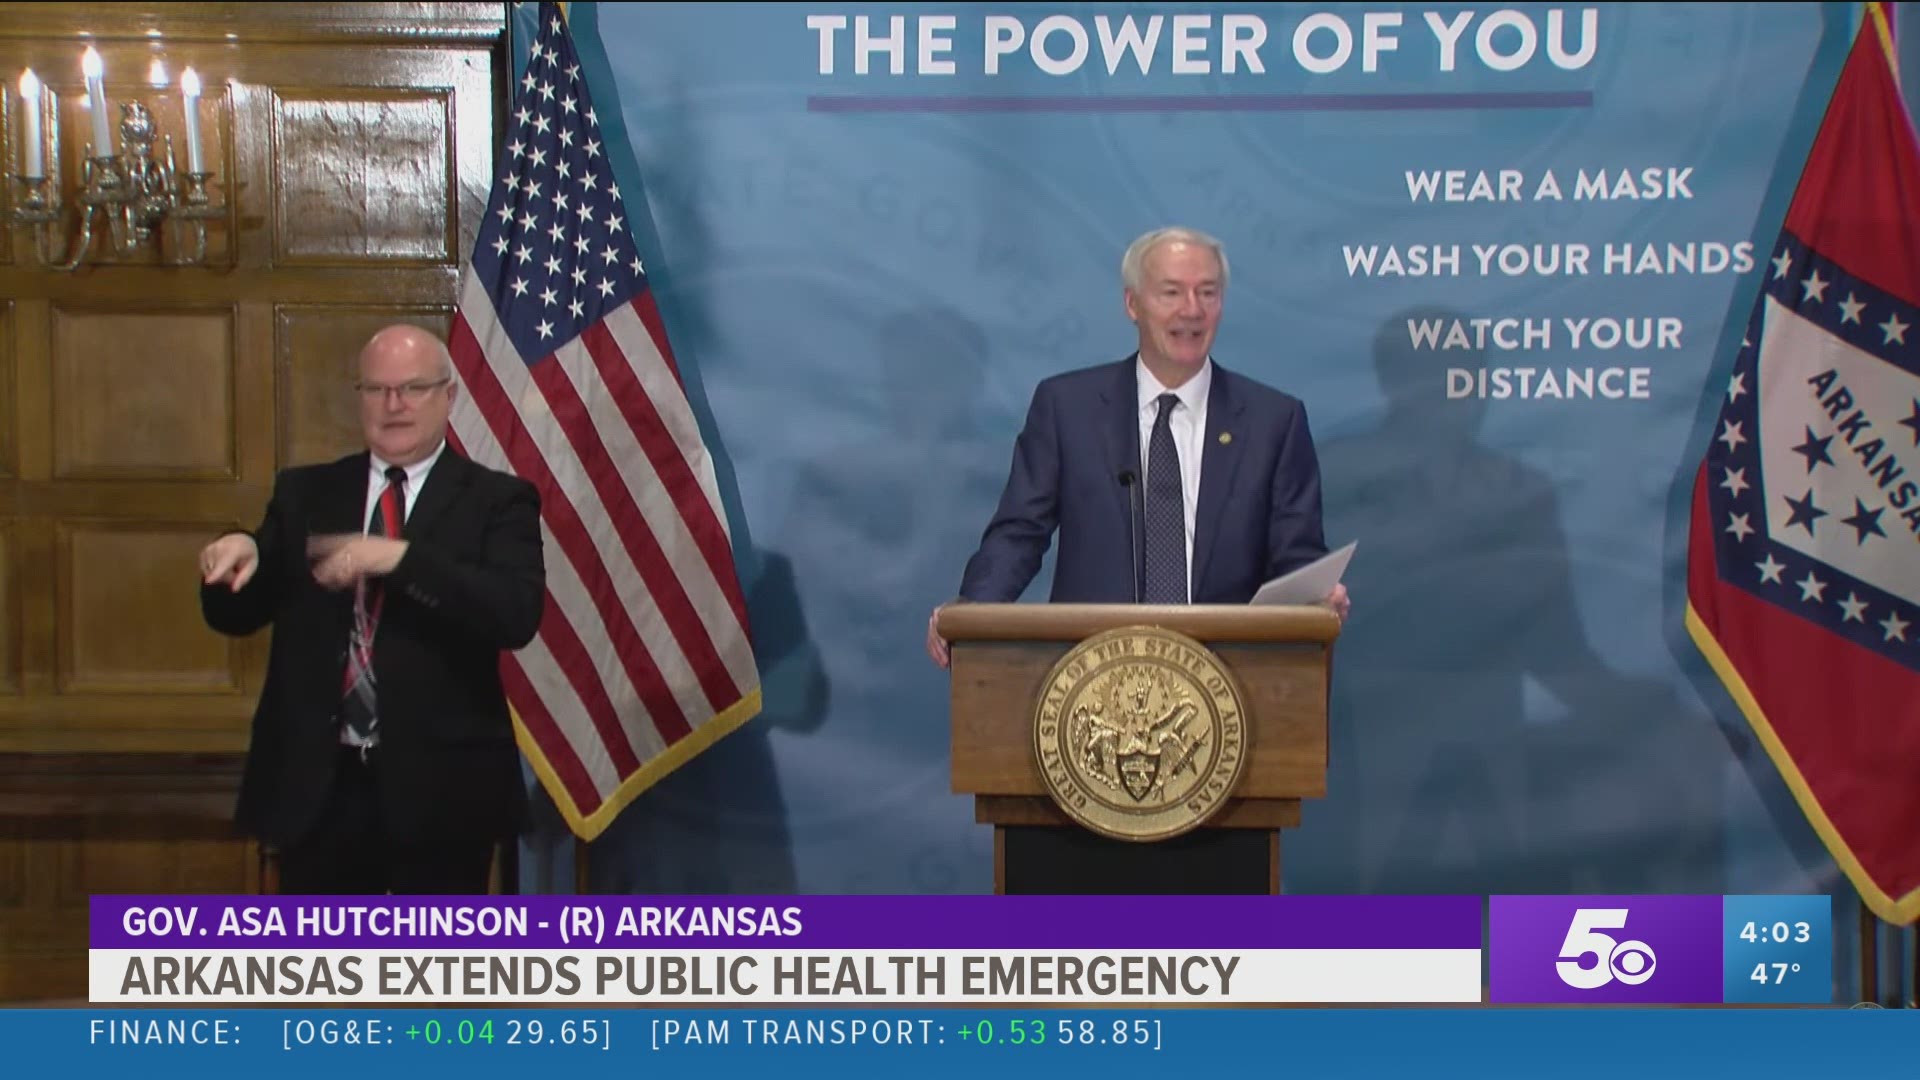 Governor Hutchinson announced Friday (Feb. 26) morning that he is extending the public health emergency until March 31.